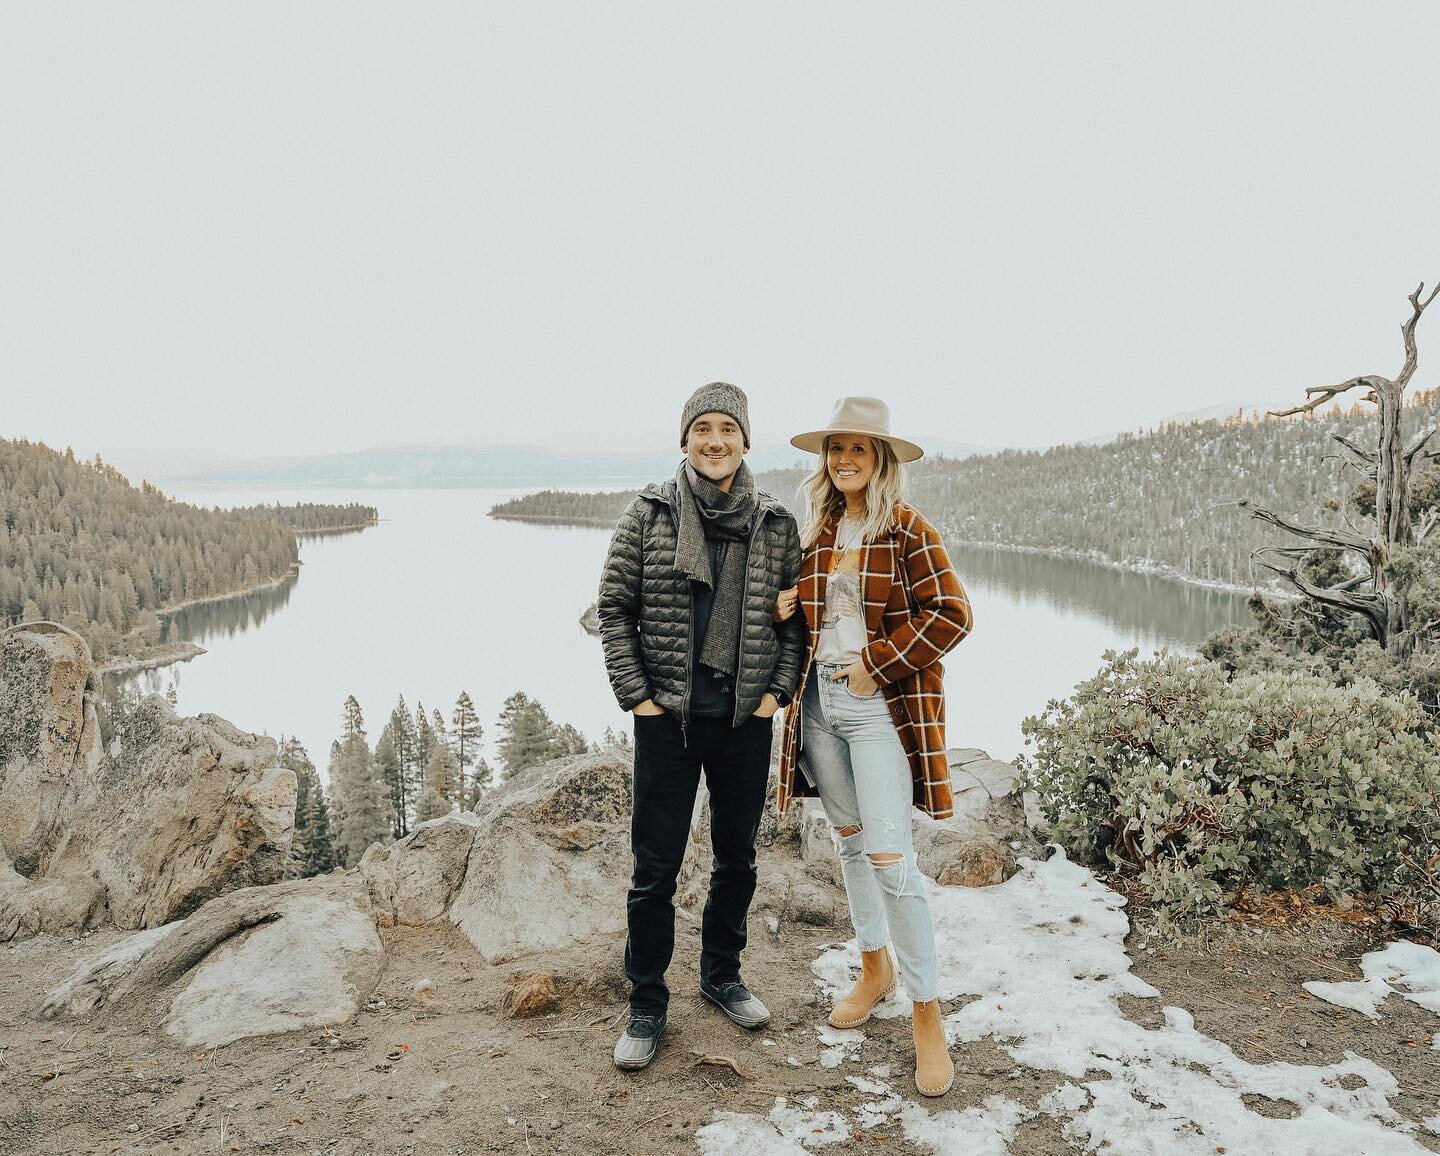 Married for two years and together for over 10. It&rsquo;s true what they say... time flies when you&rsquo;re having fun! Happy anni @hey_thayer 😘Cheers to many more adventures 💕 PS: we had to make a pit stop while we were in Tahoe to take photos e